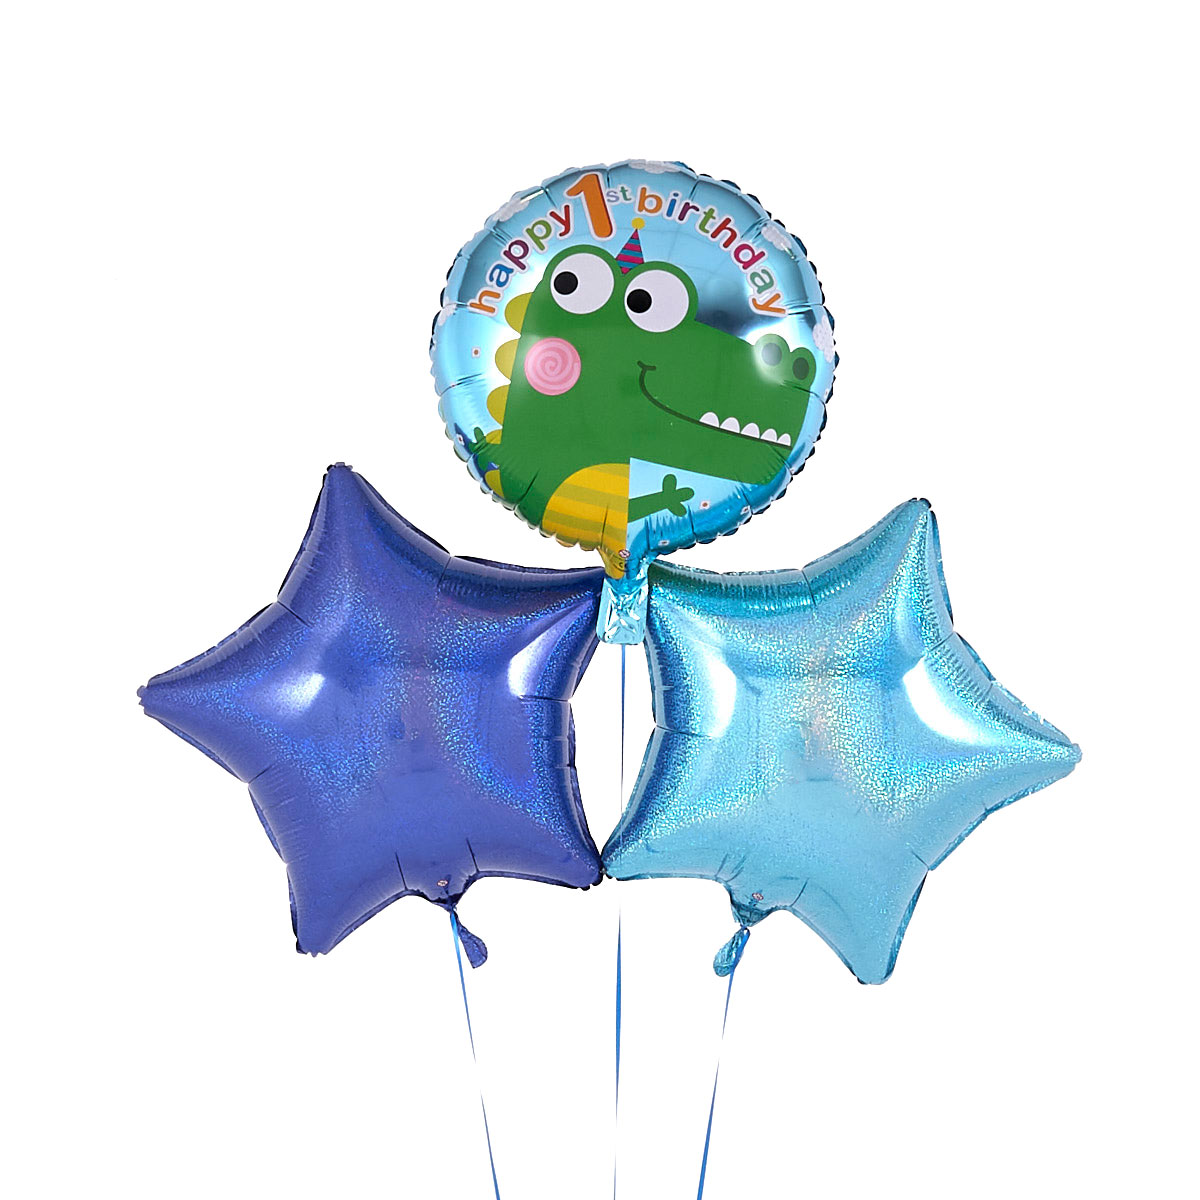 1st Birthday Crocodile Blue Balloon Bouquet - DELIVERED INFLATED!